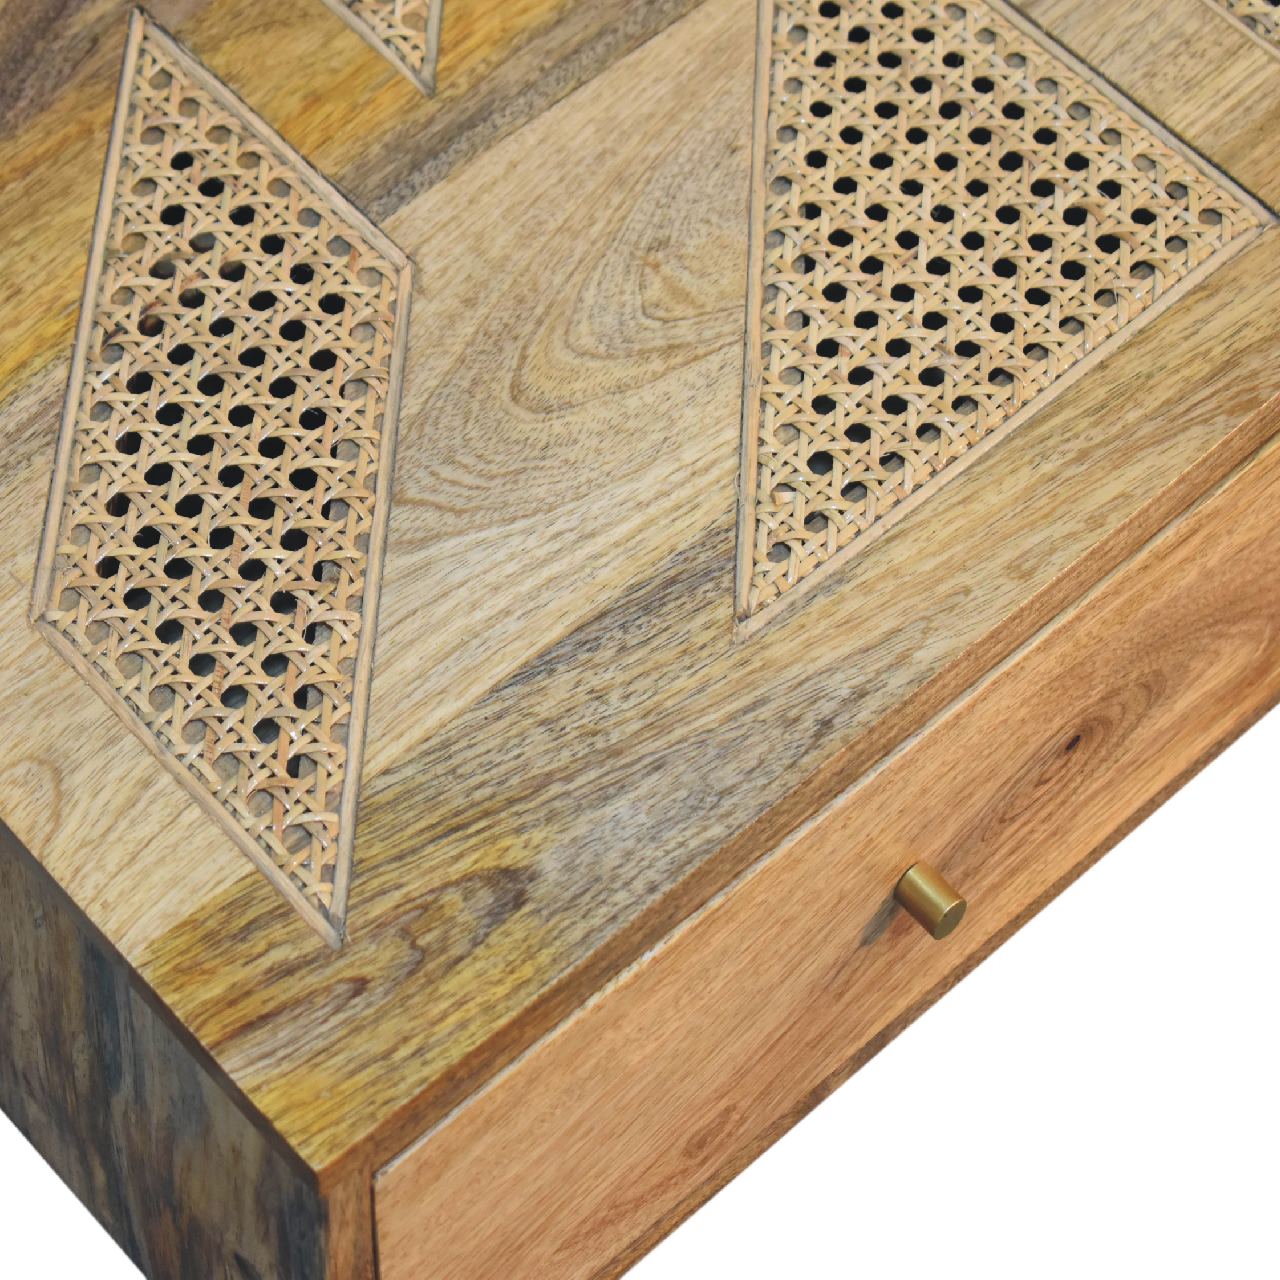 Aztec rattan woven top coffee table with drawers detail